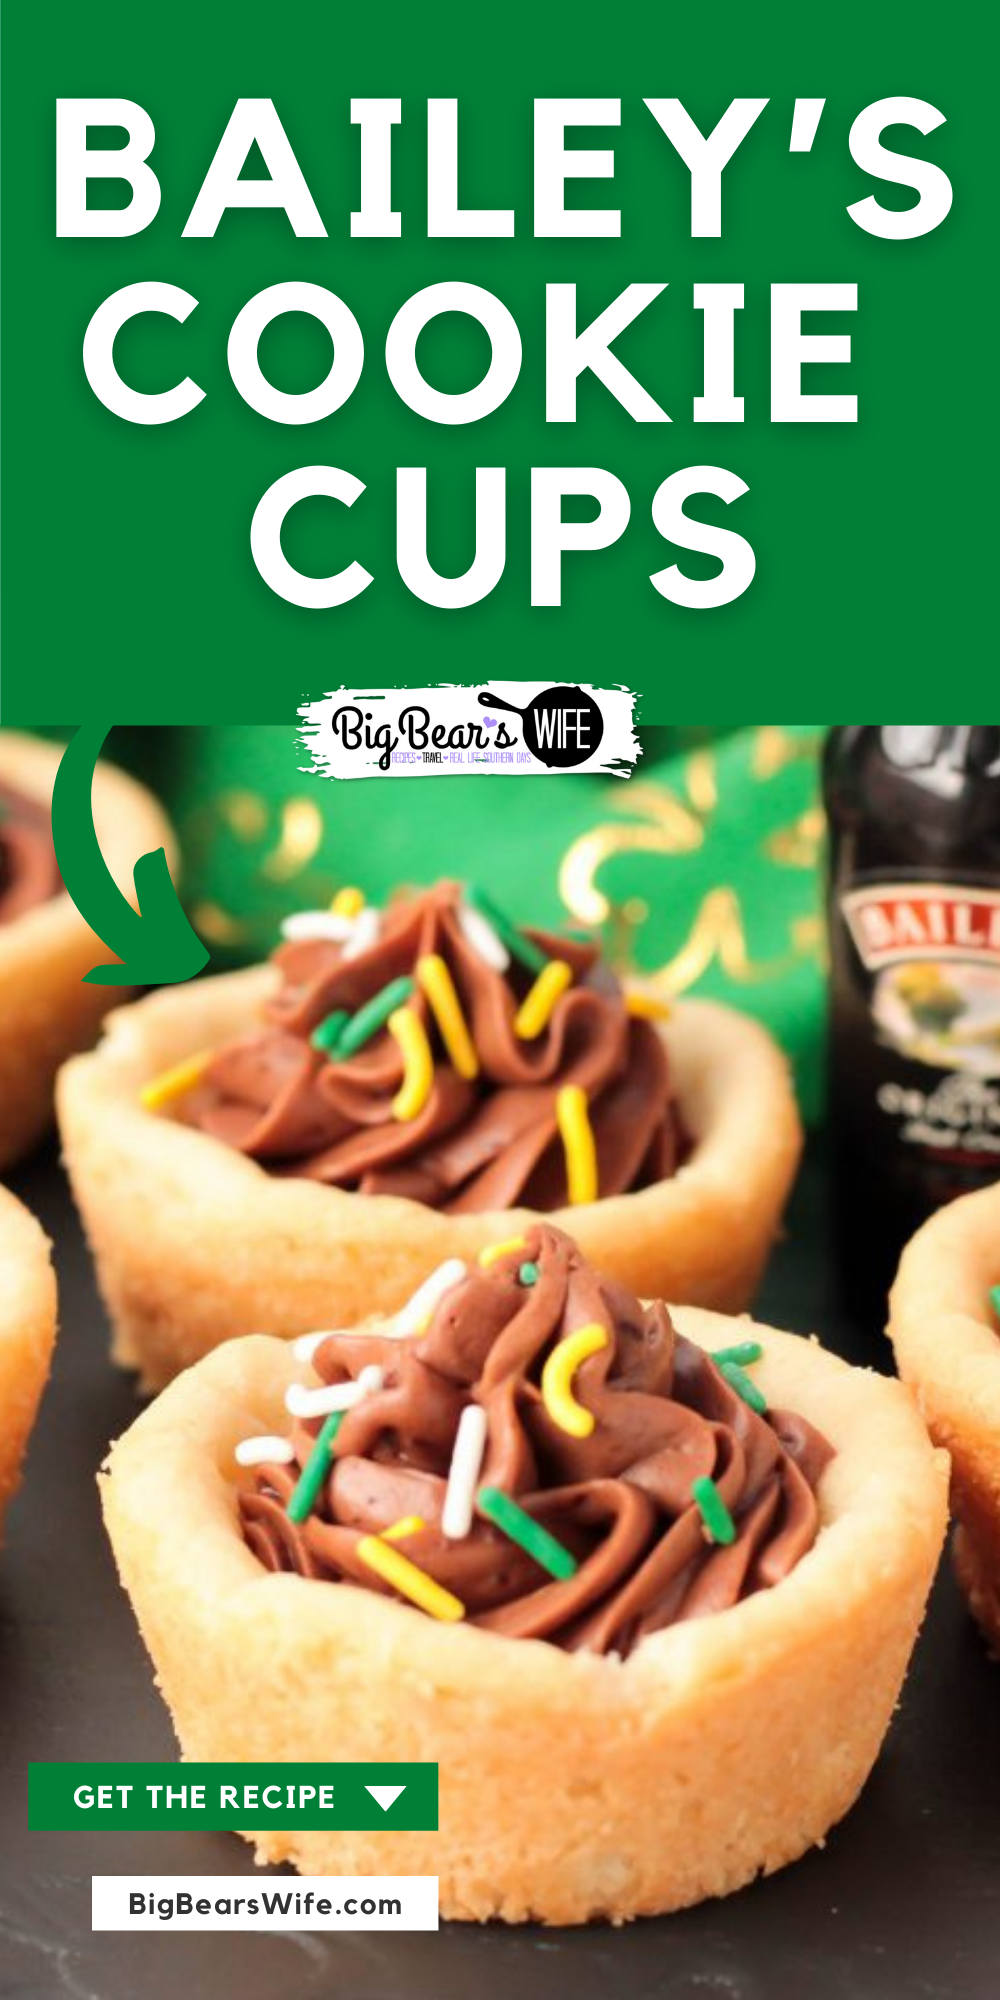 My Bailey’s Cookie Cups are made with homemade sugar cookie dough and a sweet Bailey’s Irish Cream chocolate frosting filling! Add a little something extra and decorate them with green, white and yellow sprinkles!

 via @bigbearswife